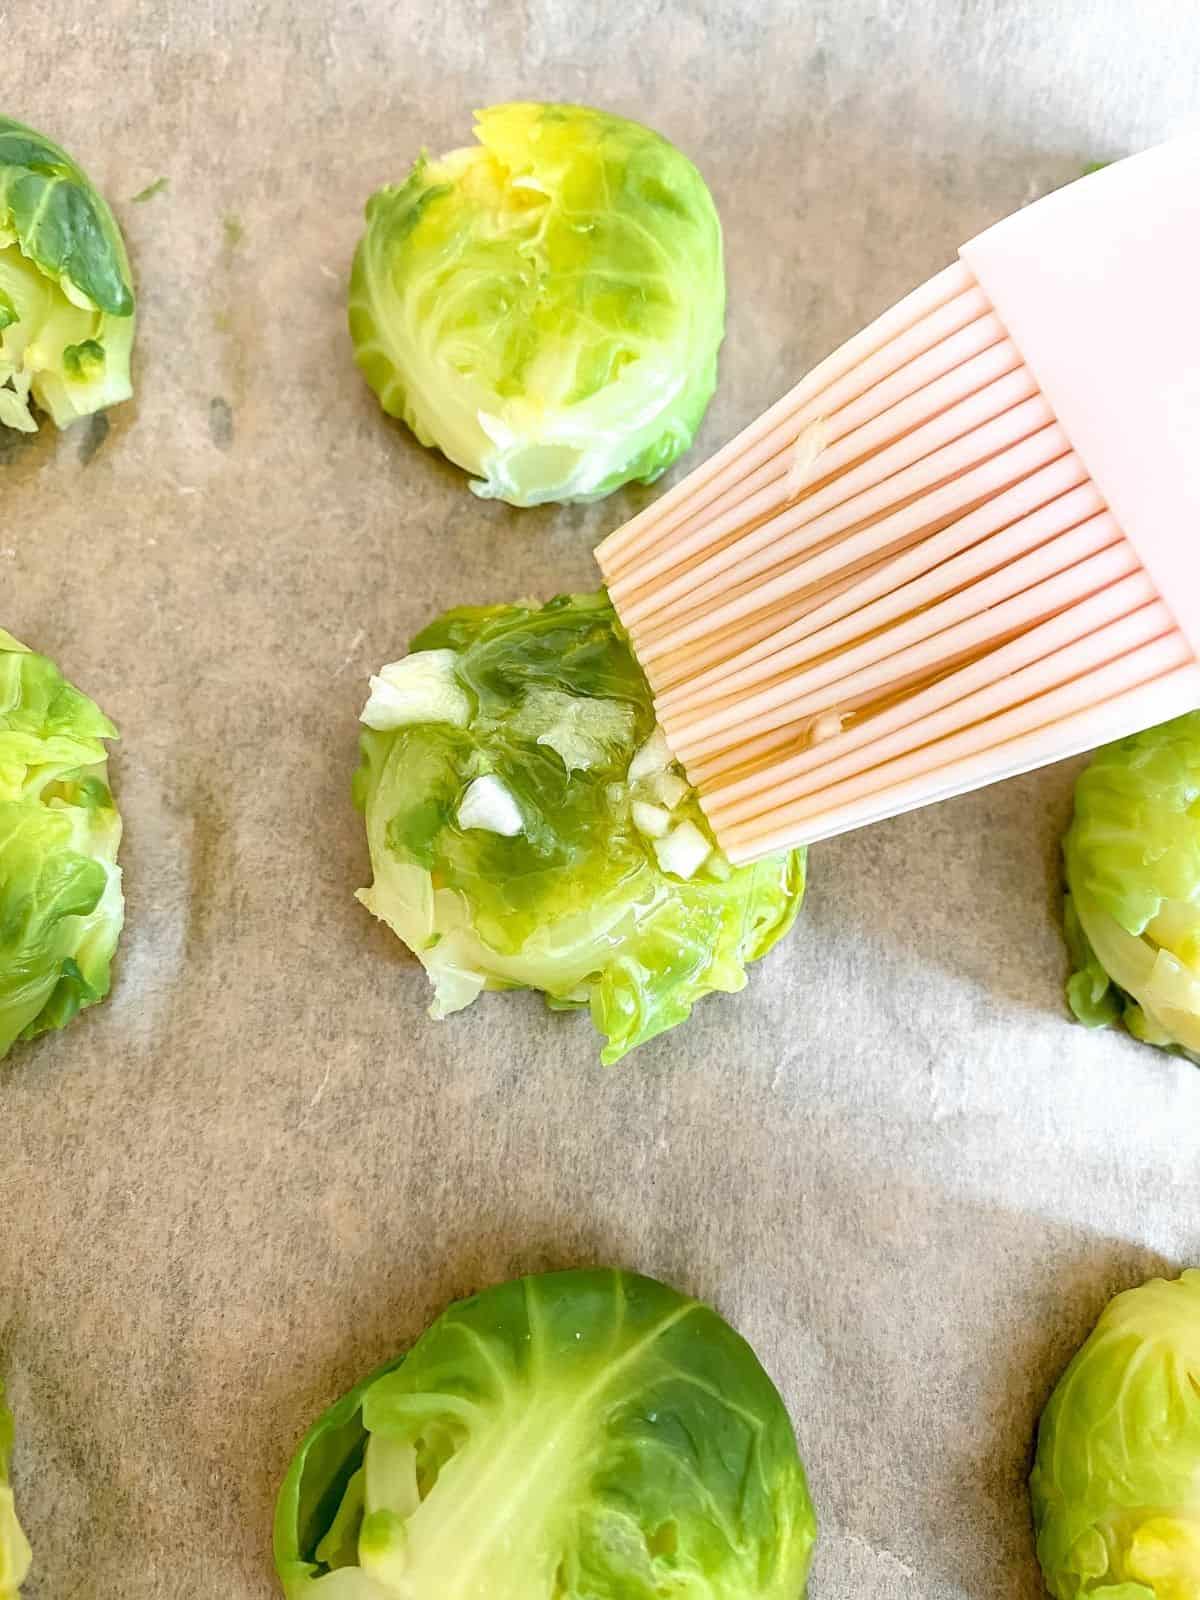 brussels sprout being basted in dressing on a baking tray.